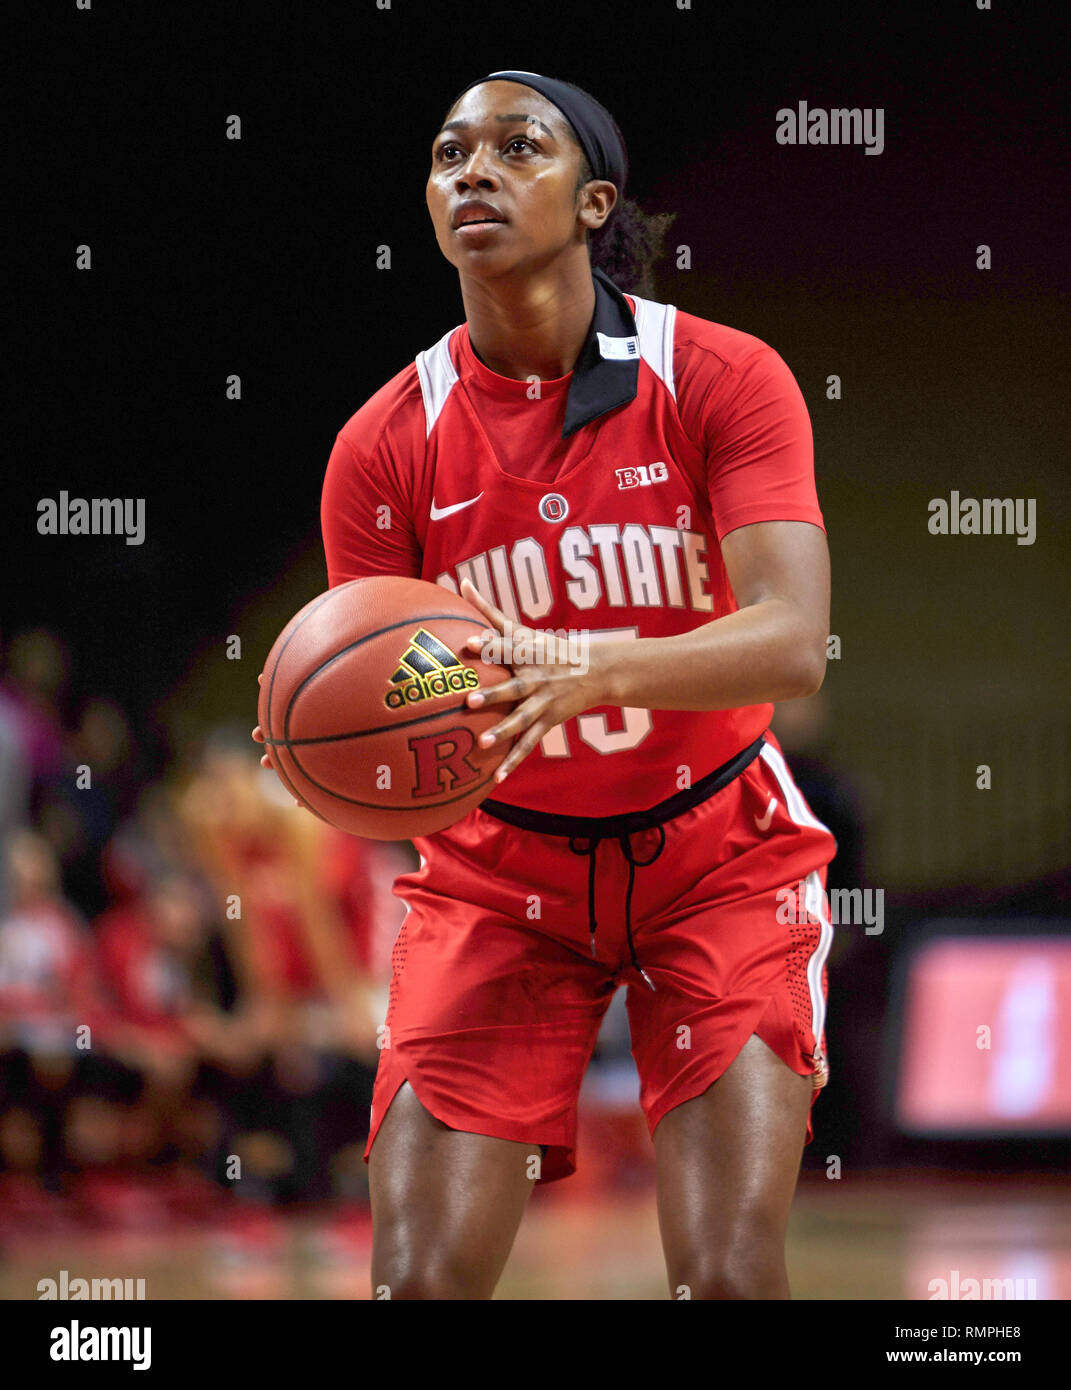 Piscataway, New Jersey, USA. 15th Feb, 2019. Ohio State Buckeyes guard  Adreana Miller (15) at the foul line in the first half between the Ohio  State Buckeyes and the Rutgers Scarlet Knights